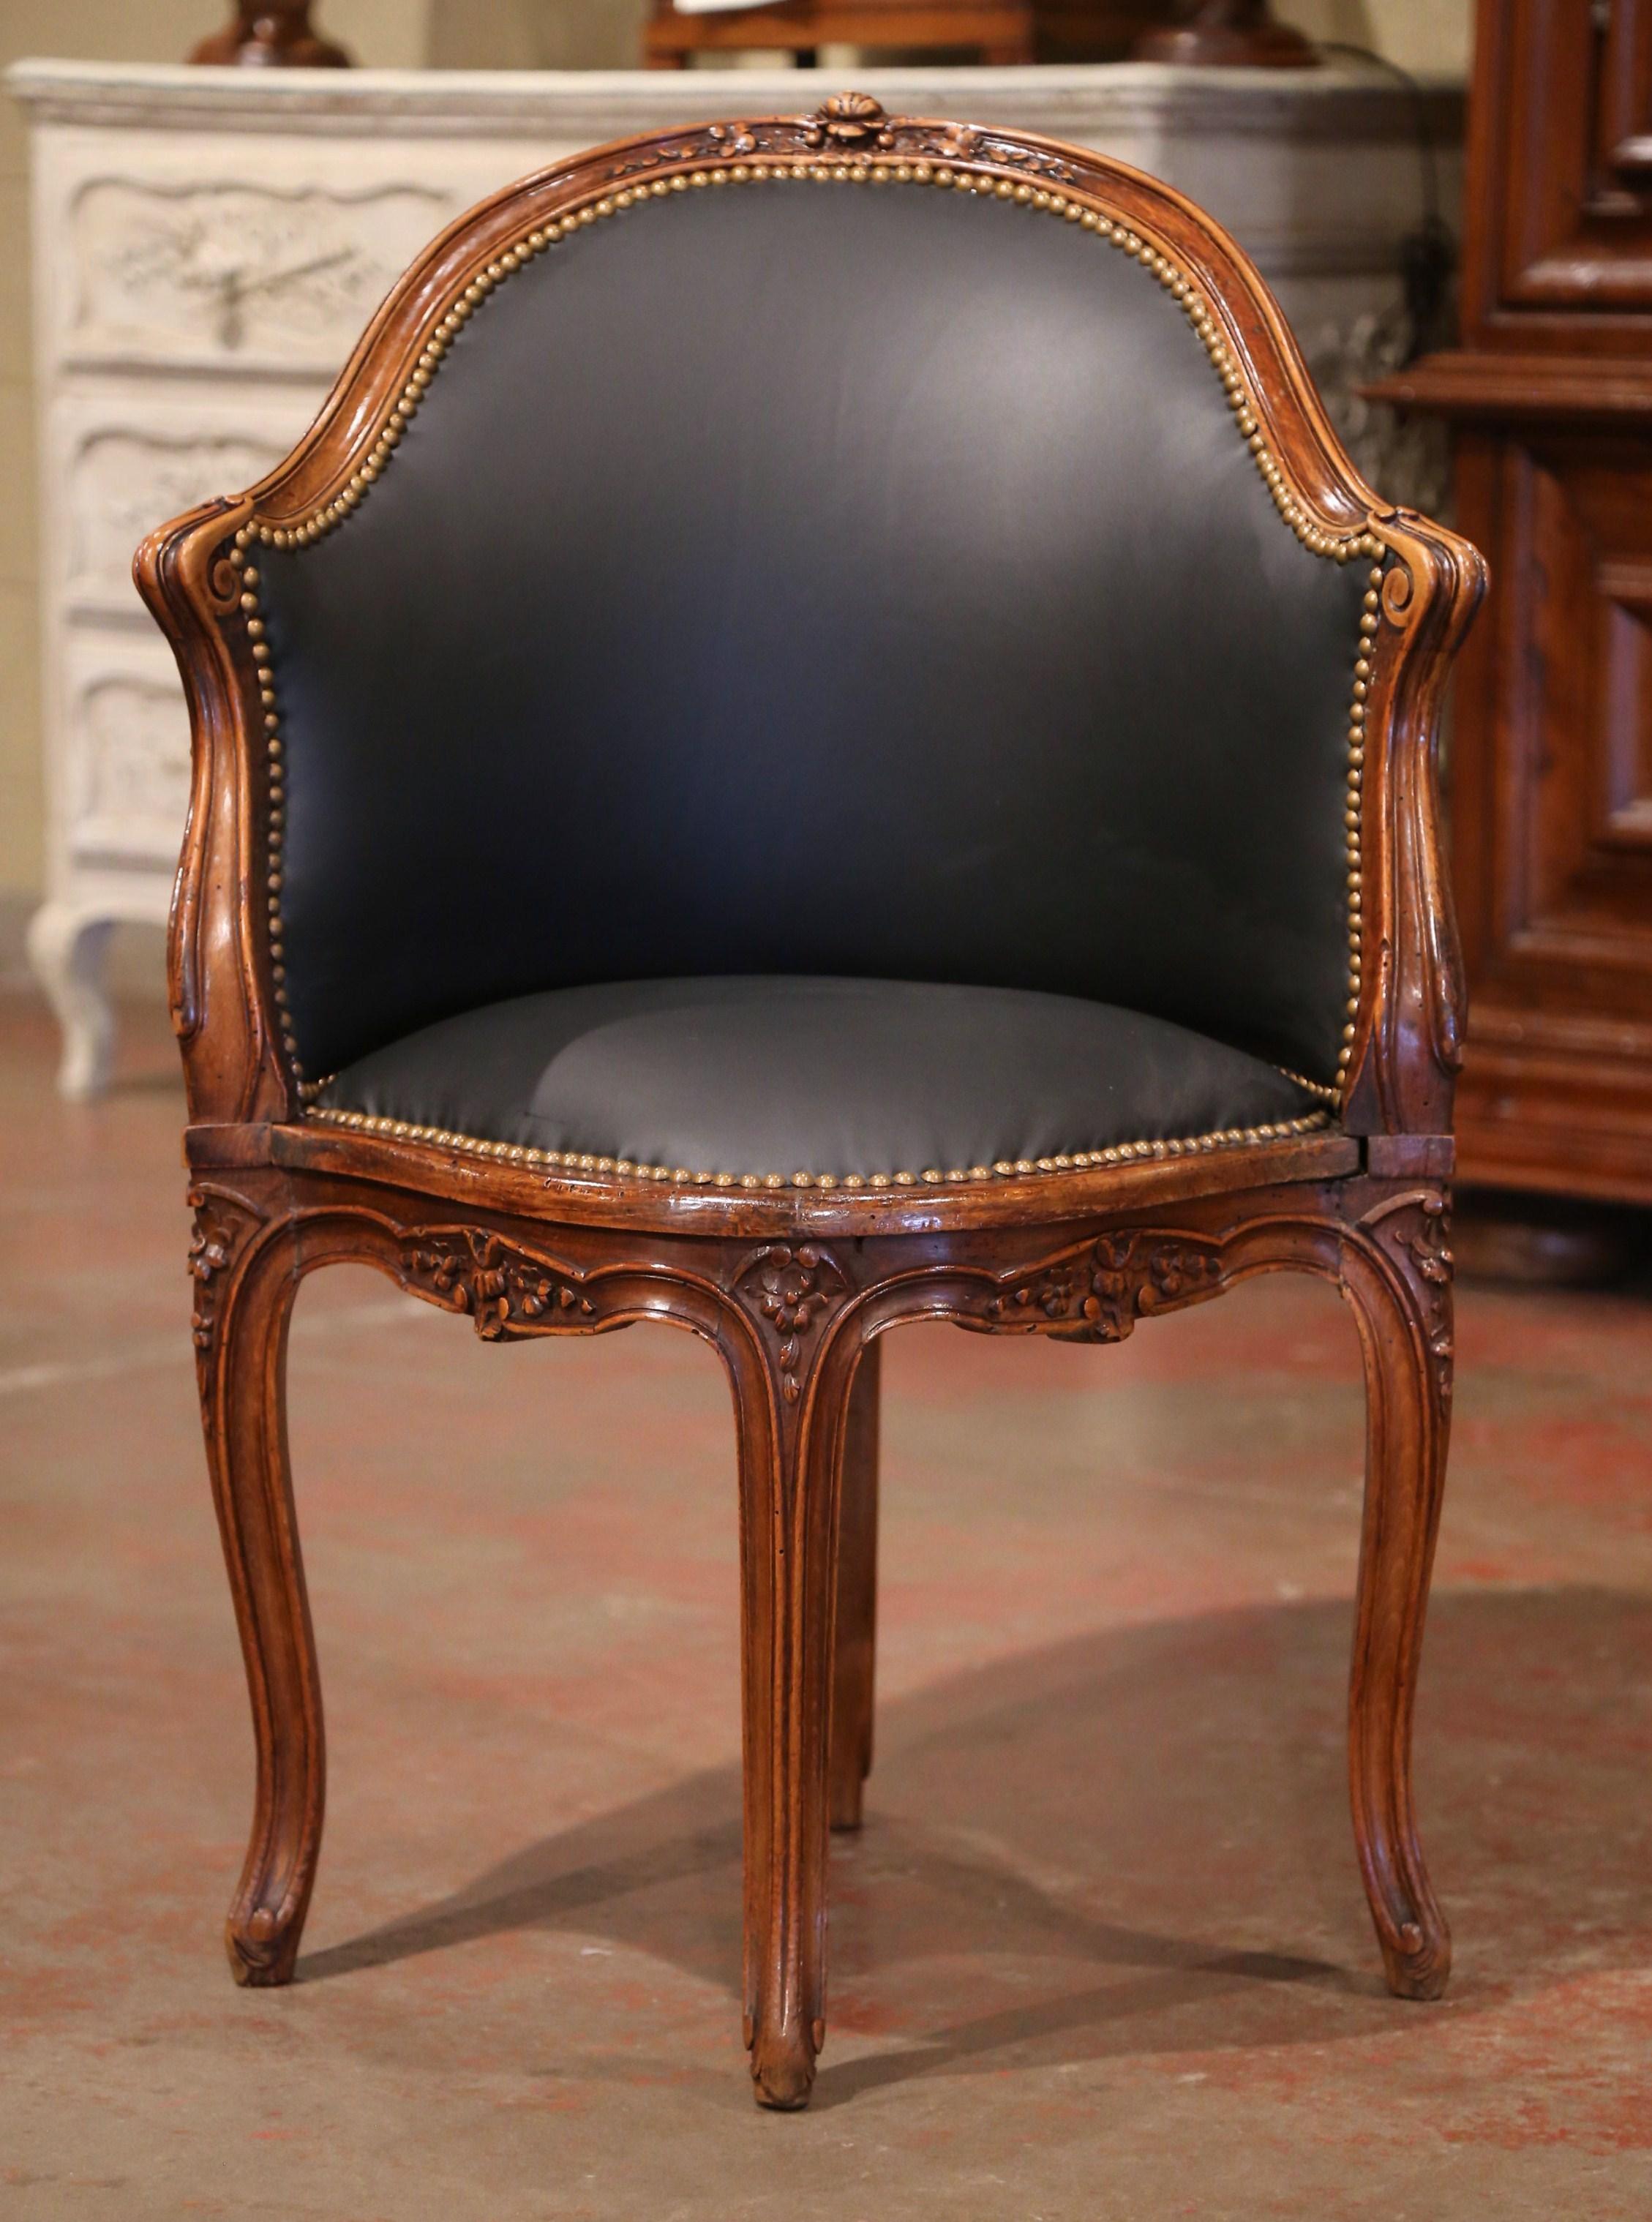 Decorate a study or office with this beautiful antique desk chair. Crafted in Provence, France, circa 1850 and shaped as a corner seating, the armchair features a curved and arched back decorated with carved floral motif at the pediment. The Louis